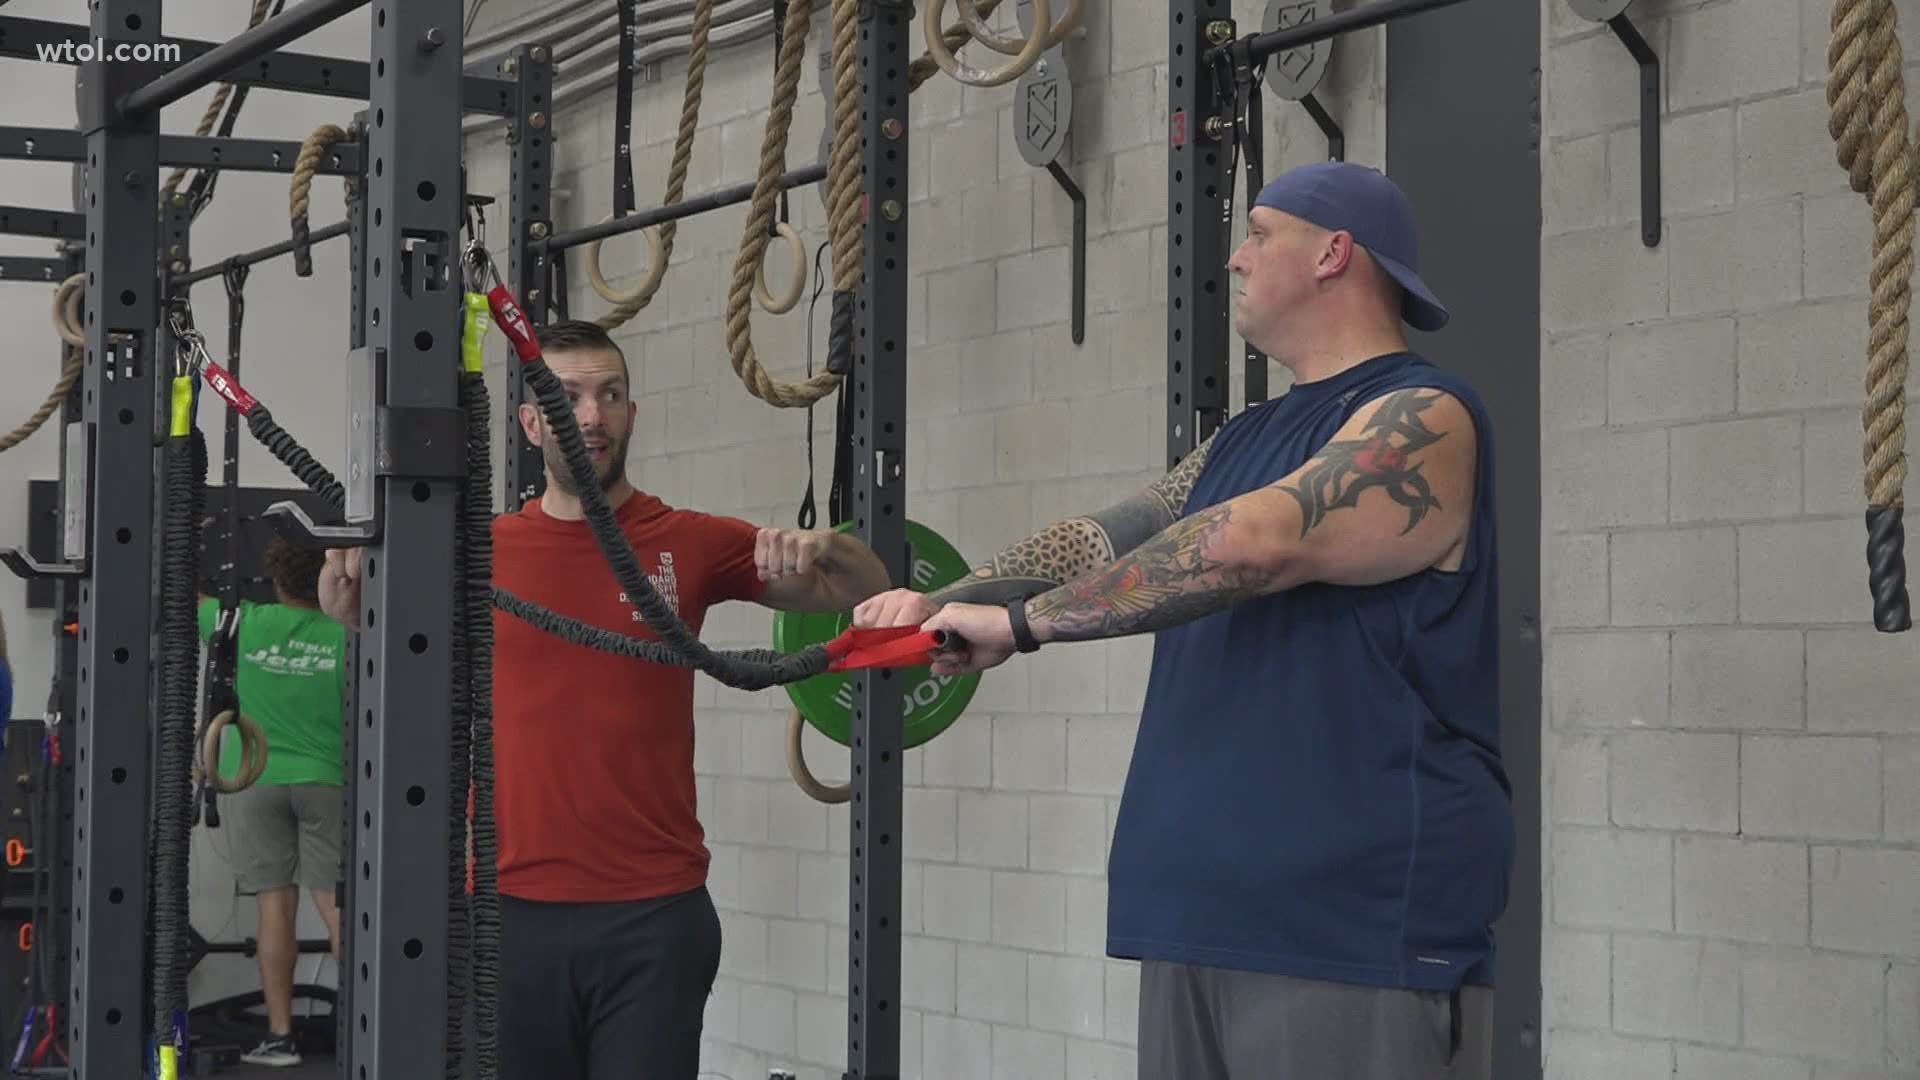 With the winter months on the way, The Standard CrossFit gym offers relief for those battling seasonal depression or who want to workout inside.